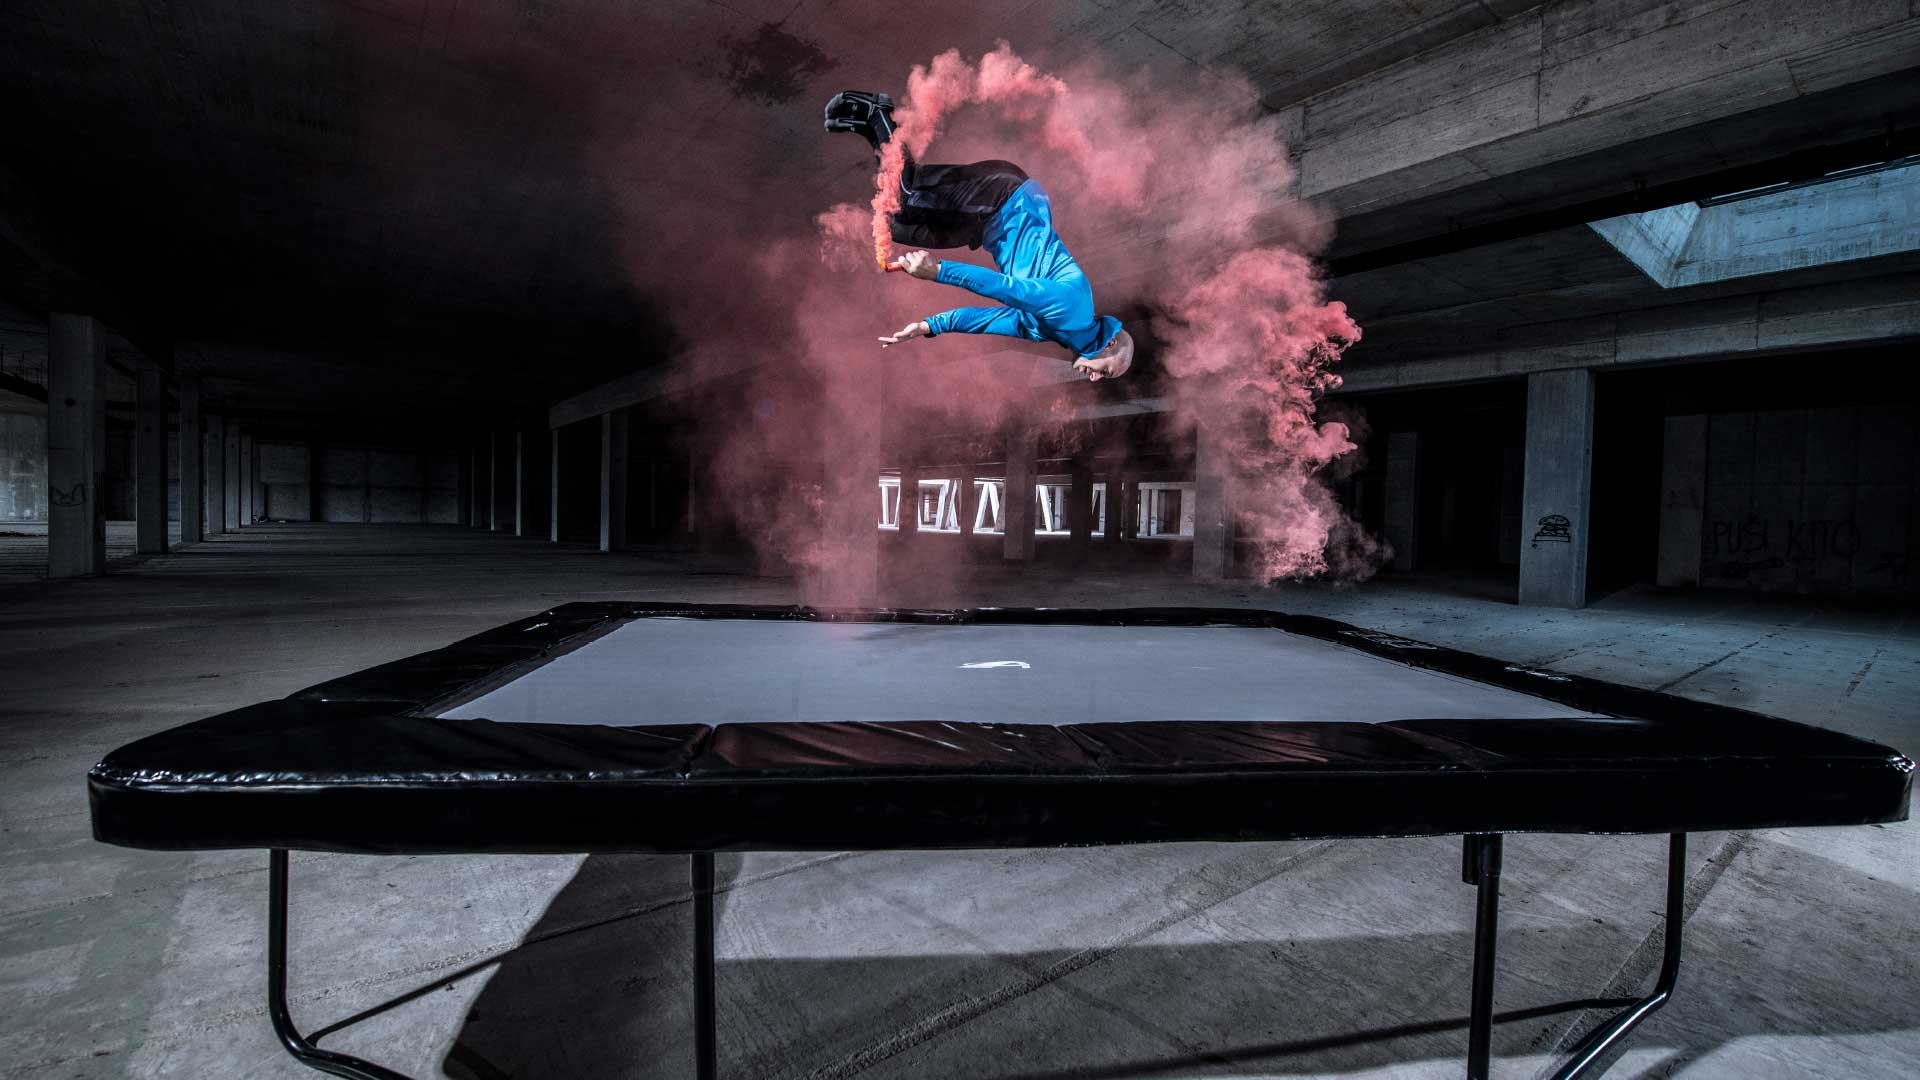 Trampolining: Air painting artistic acrobatic performance by a professional trampoline jumper. 1920x1080 Full HD Background.